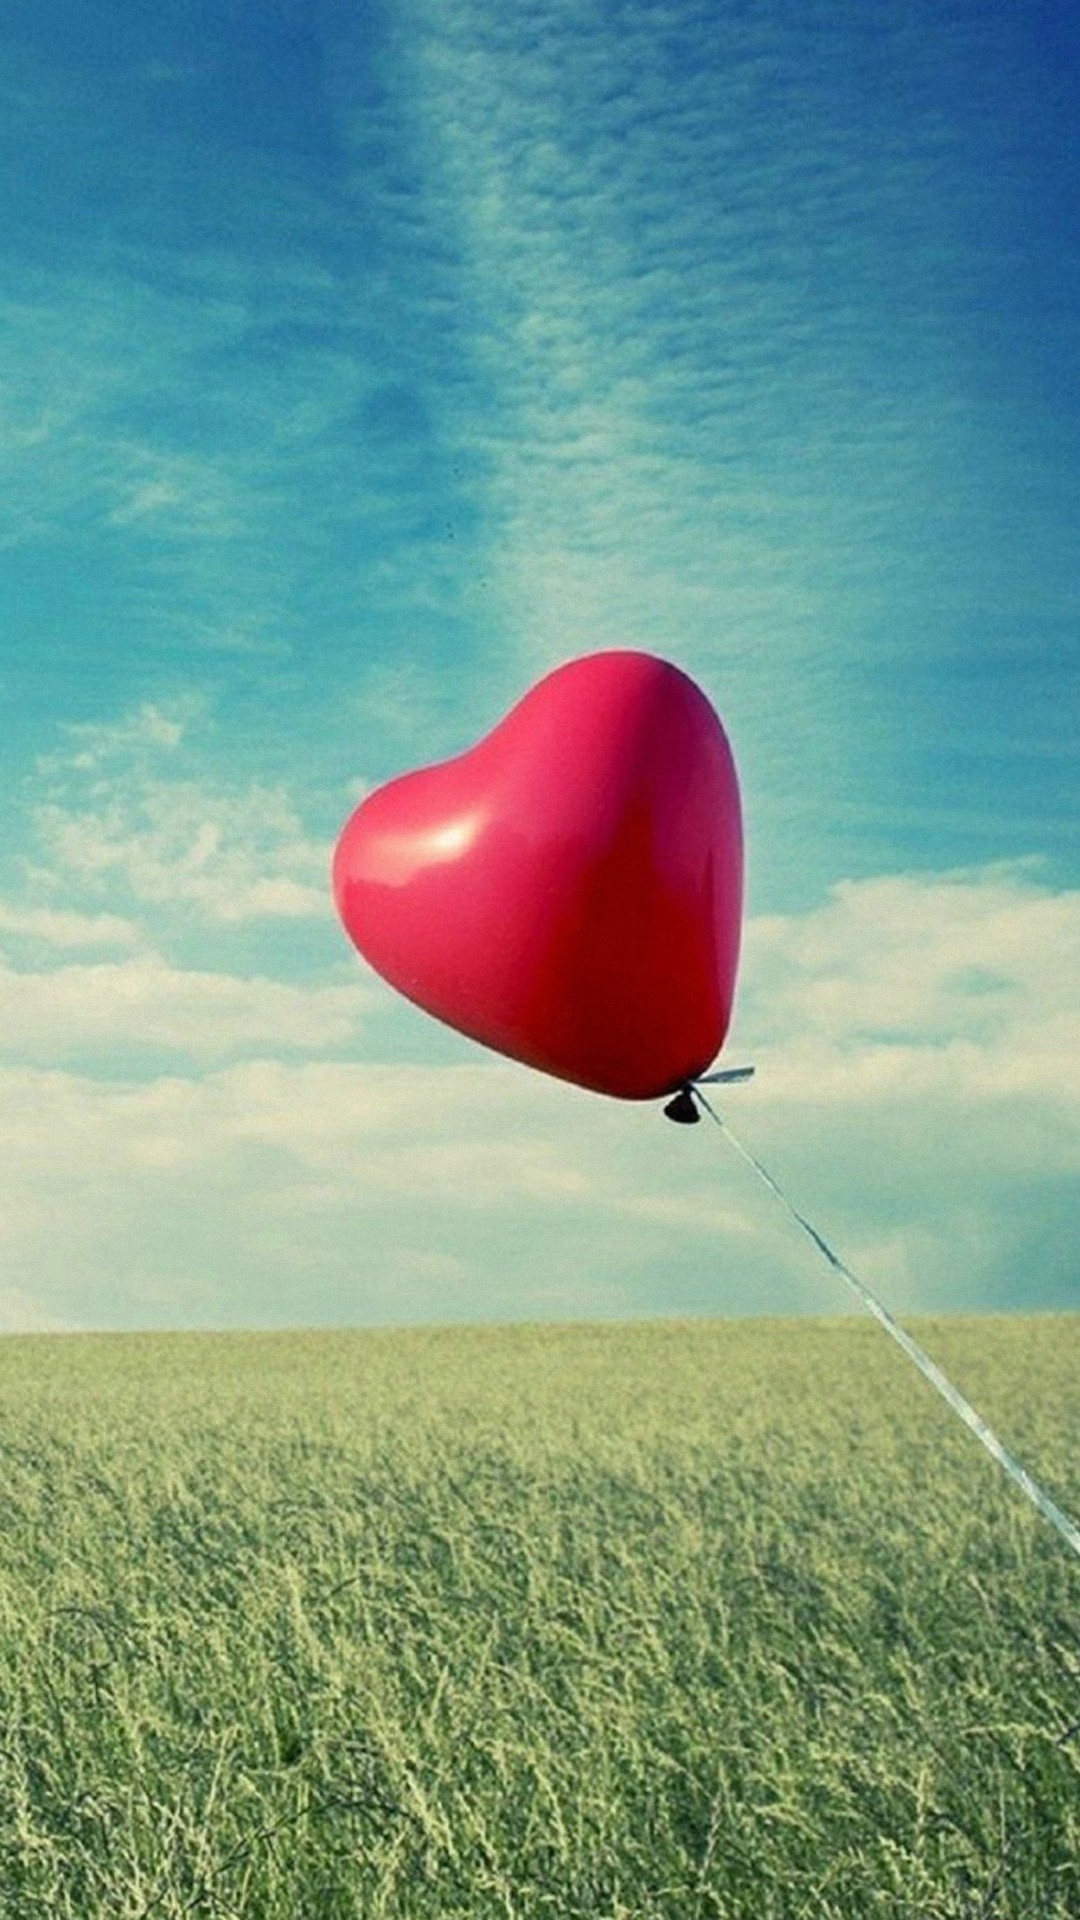 Love Ballon Android Wallpaper with HD resolution 1080x1920